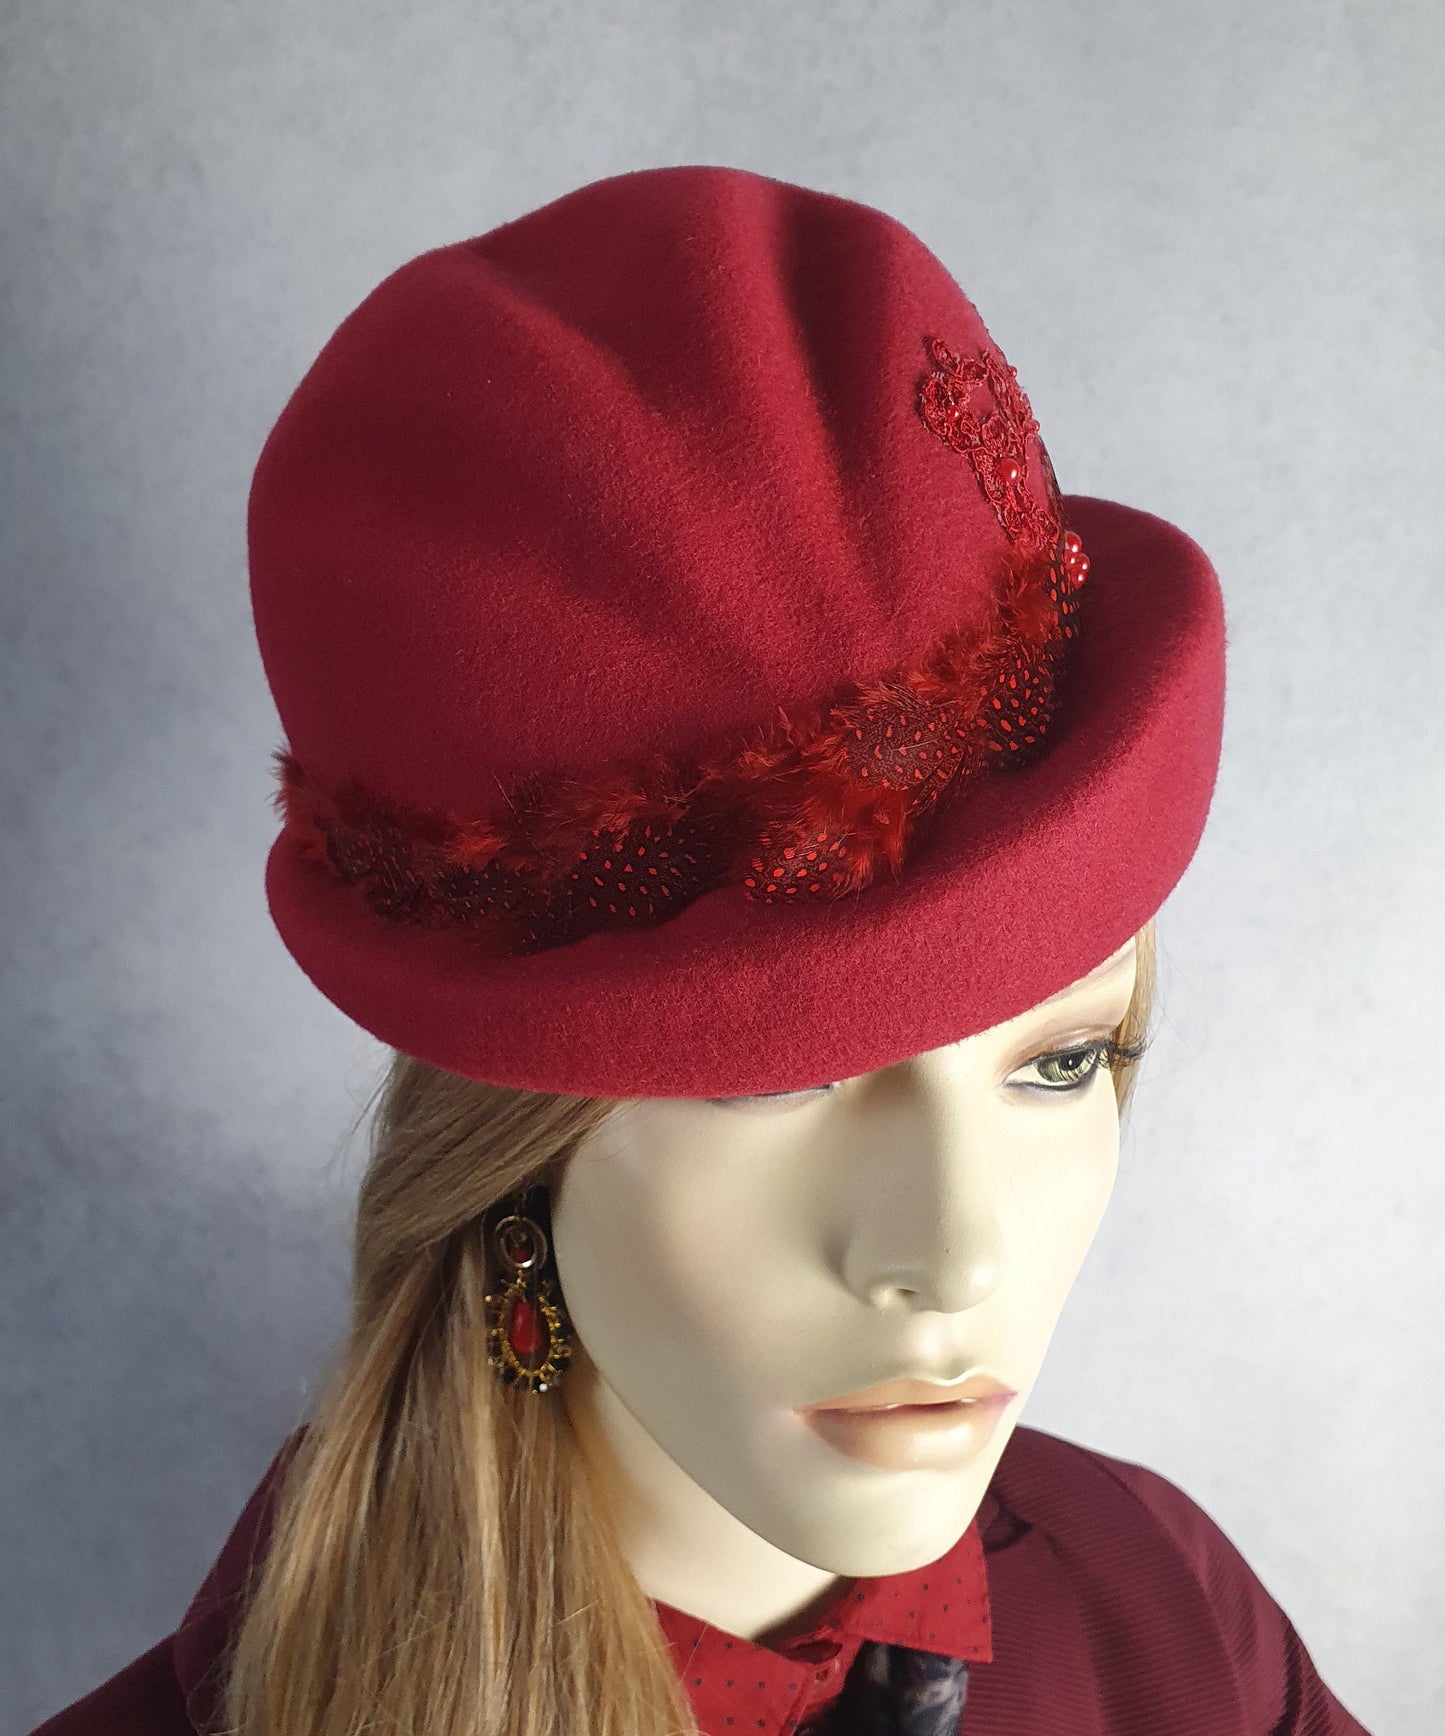 Handmade felt hat in burgundy red, elegant vintage hat with pheasant feathers - Perfect for autumn &amp; winter and special occasions